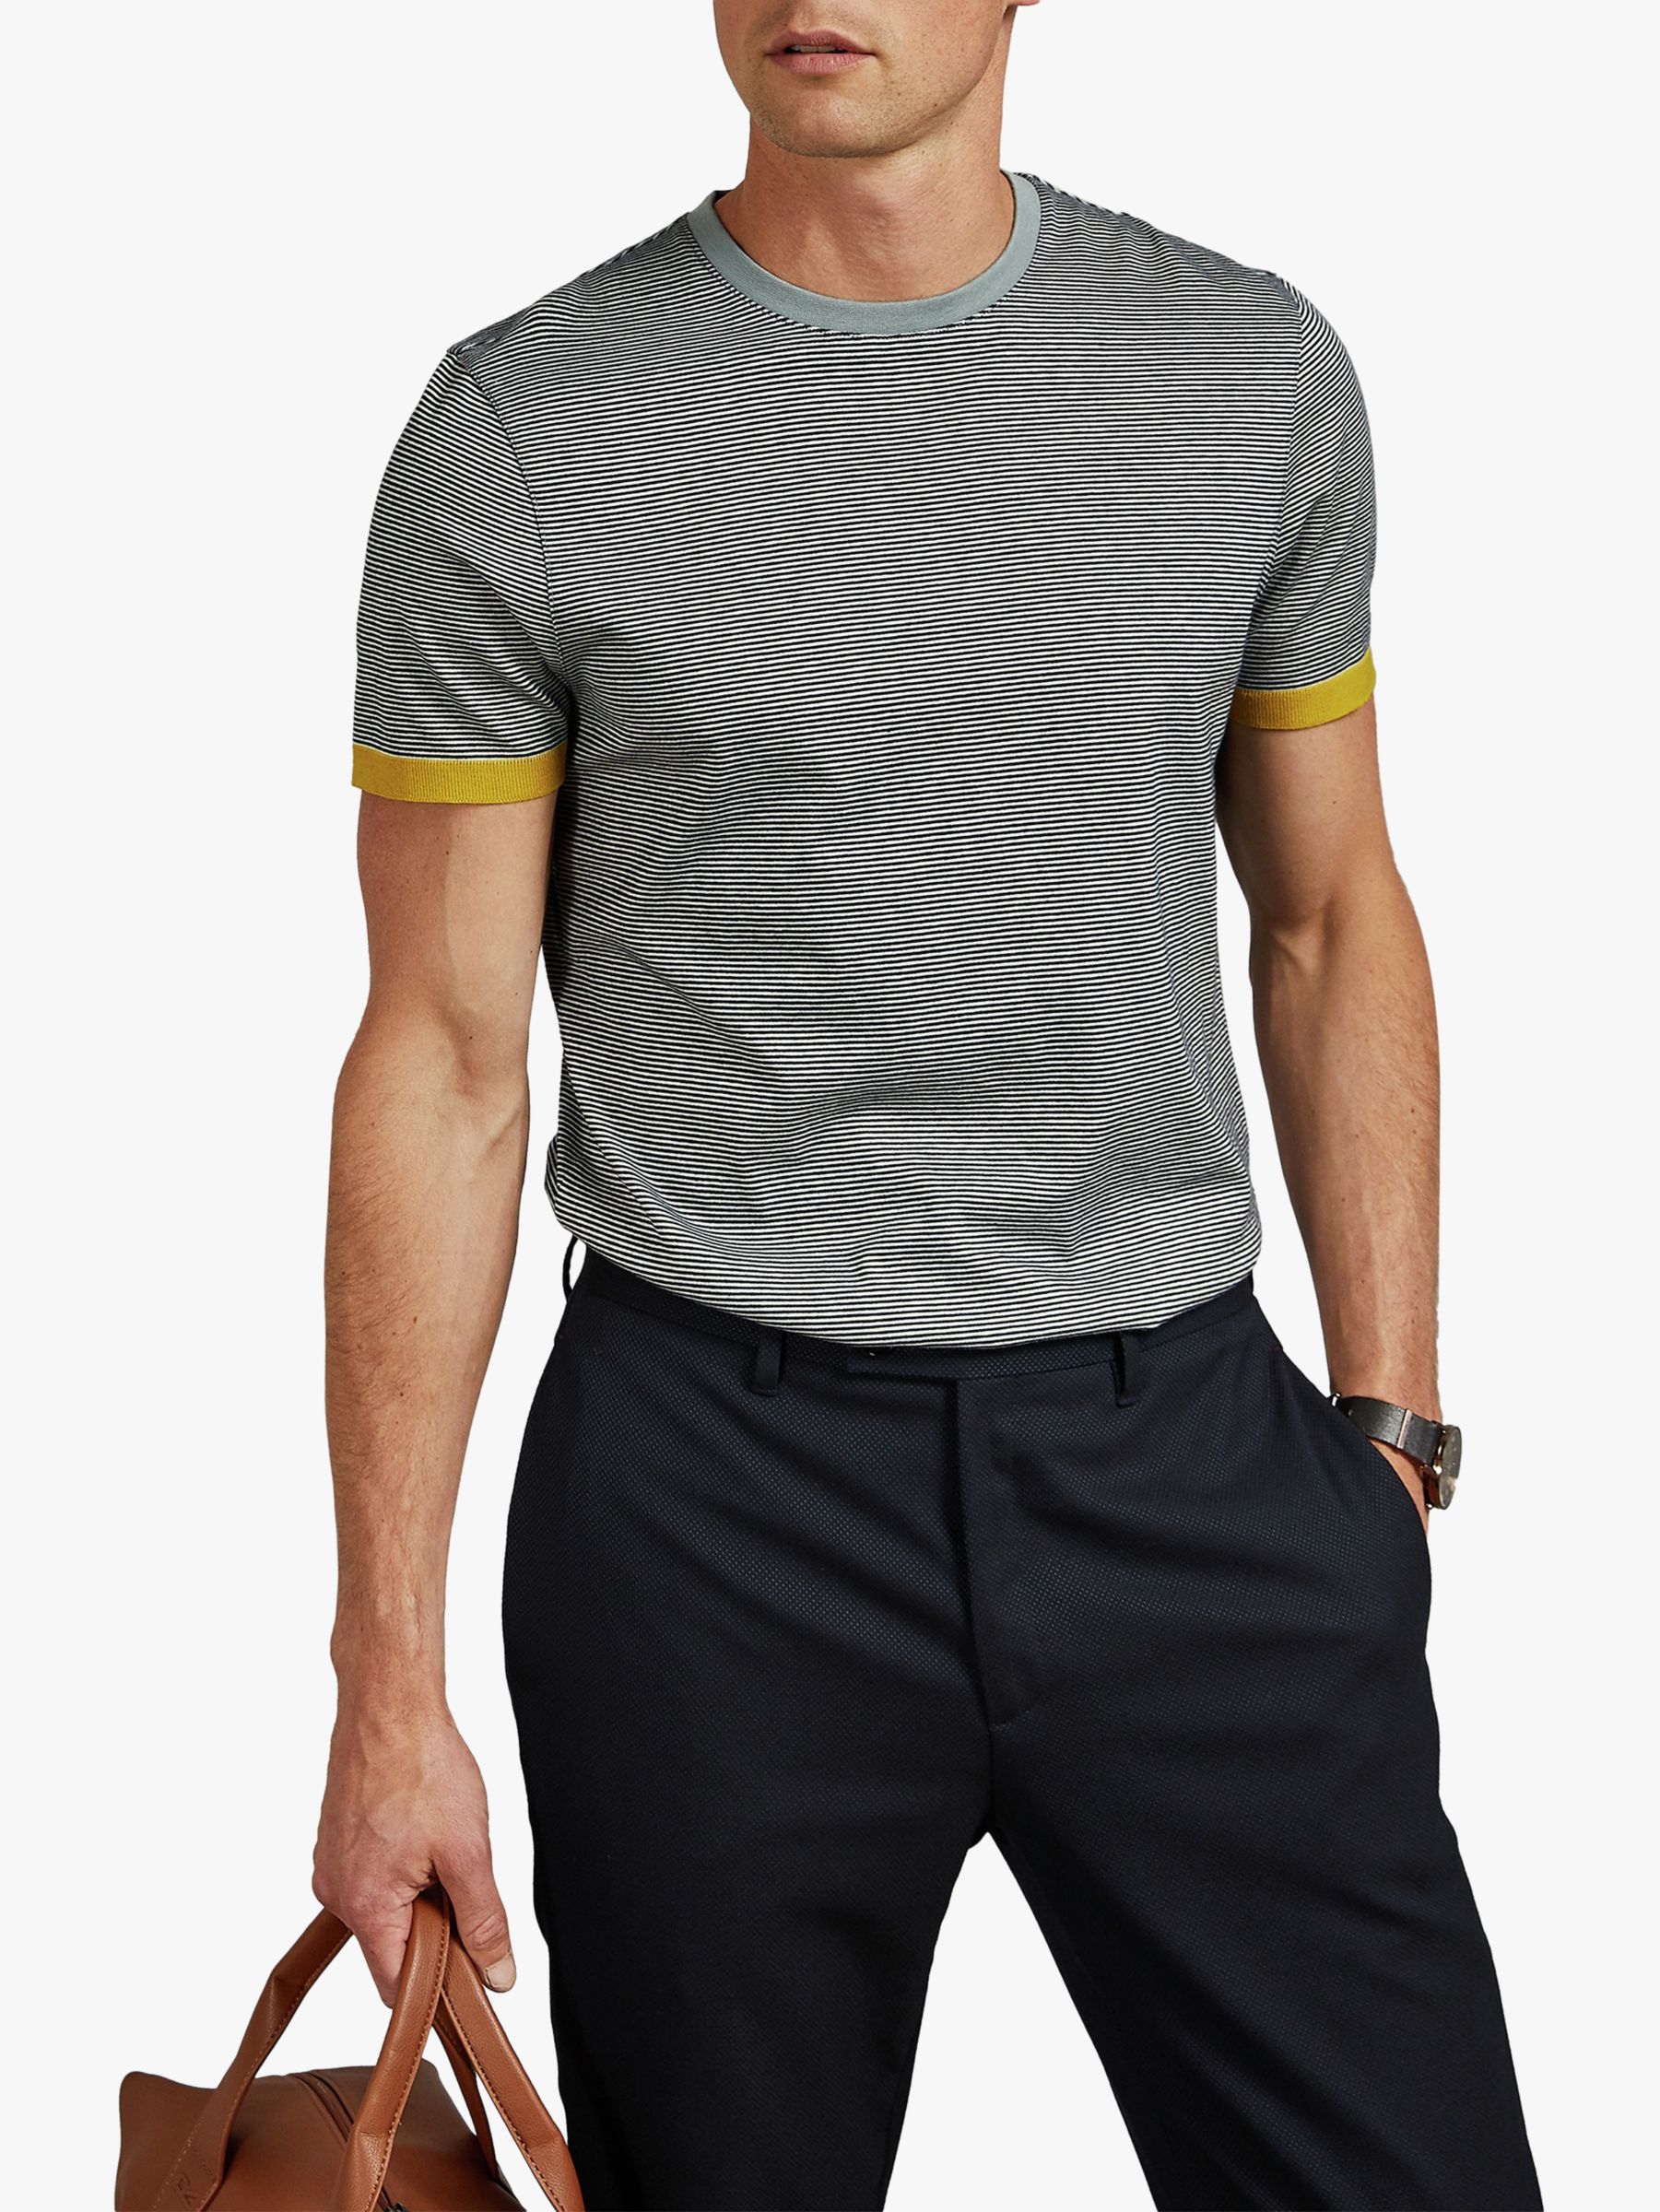 Ted Baker Delsole Stripe T-Shirt, Navy